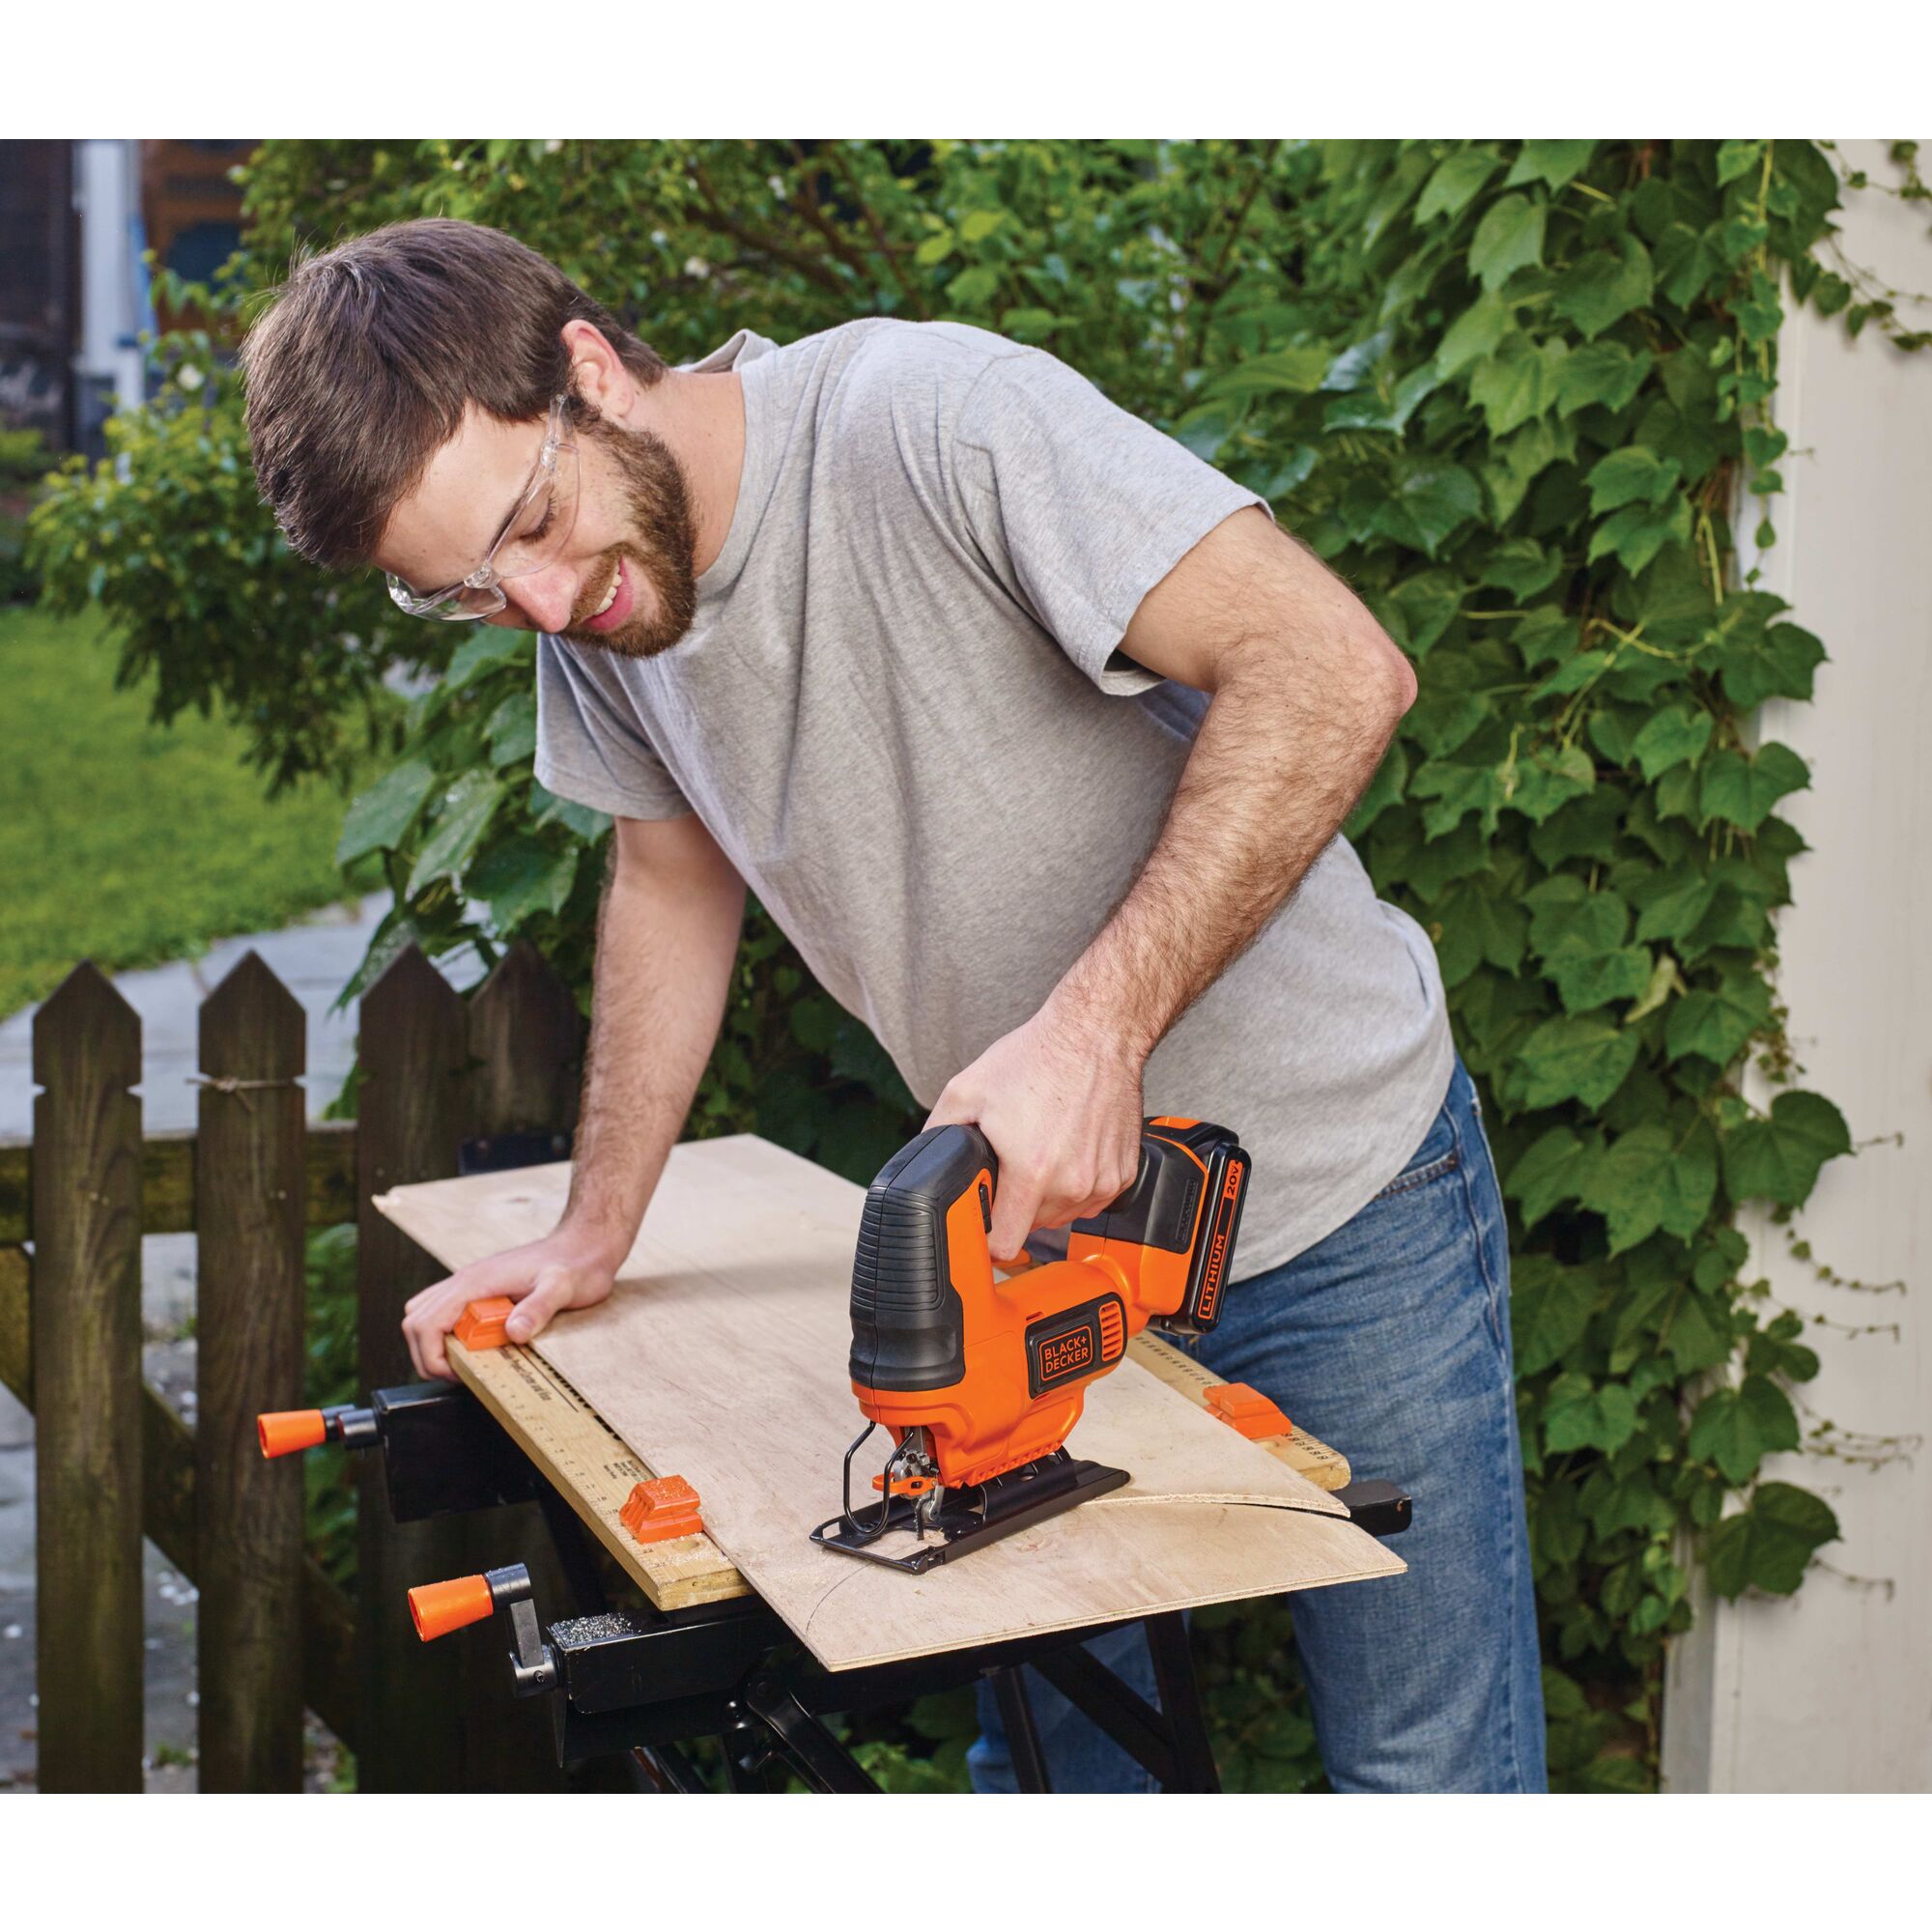 Cordless Jigsaw being used for cutting plywood by person.